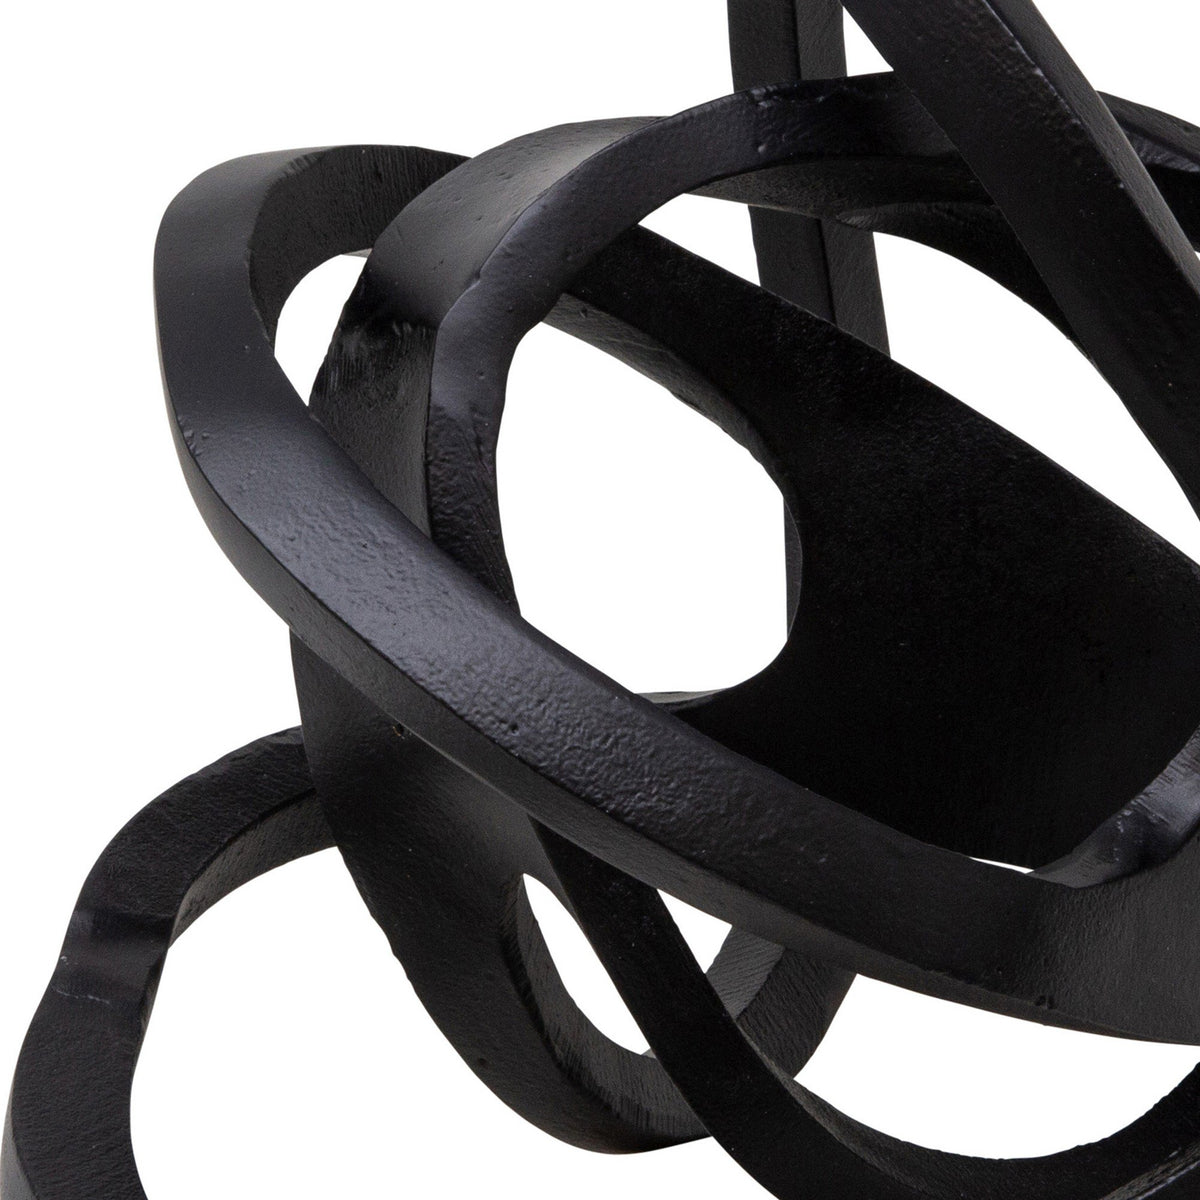 Metal Accent Decor with Interconnected Knot Design, Black - BM221165